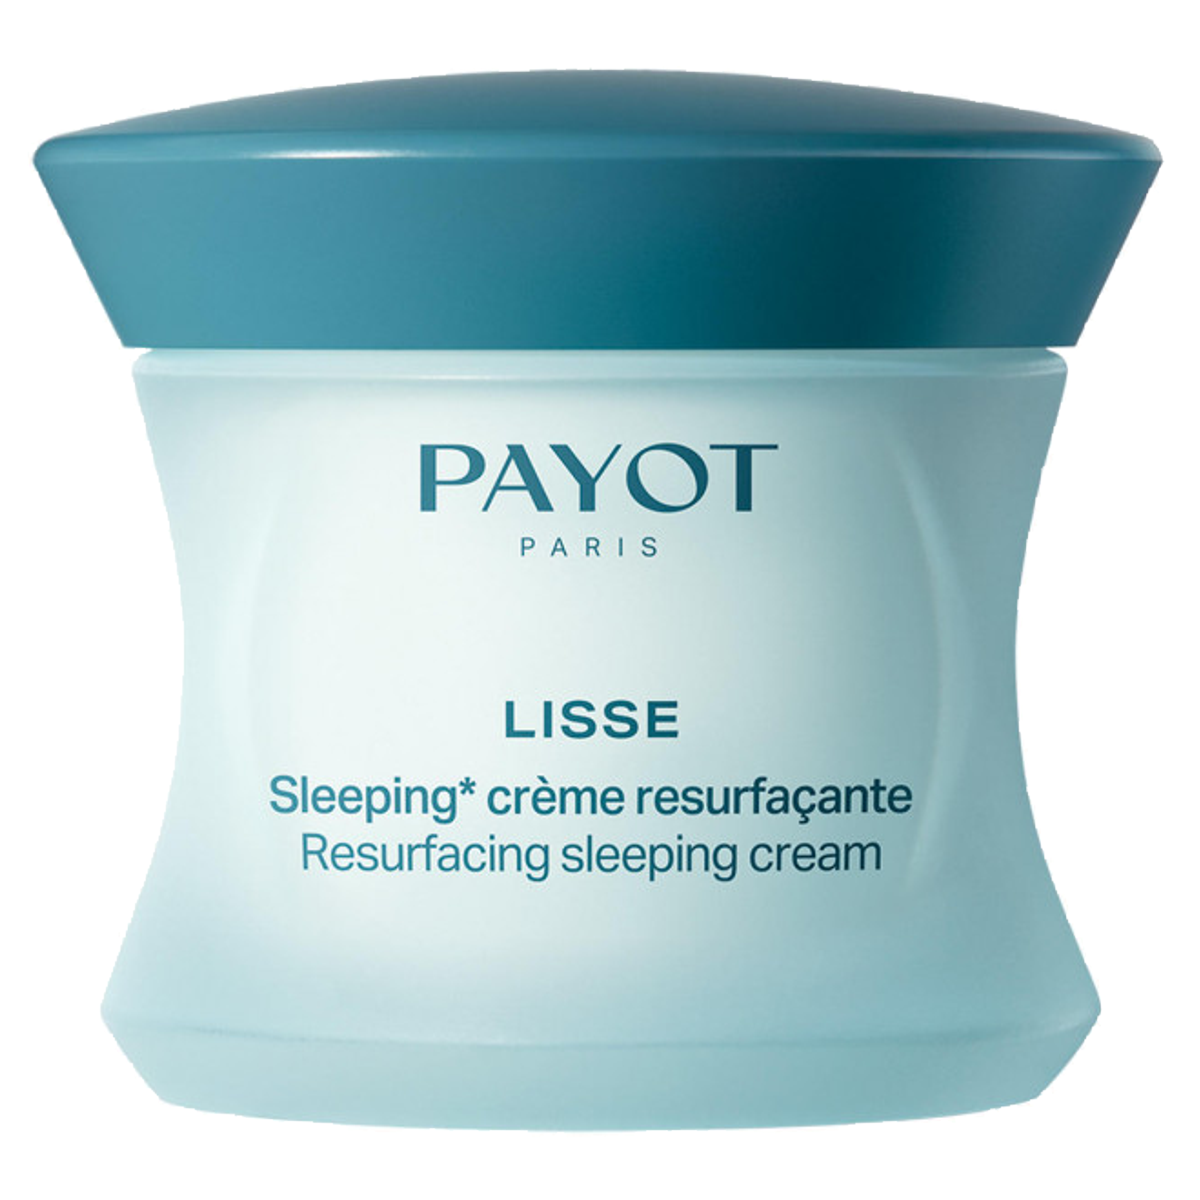 Payot Lisse Sleeping Creme Resulfacante 50 ml